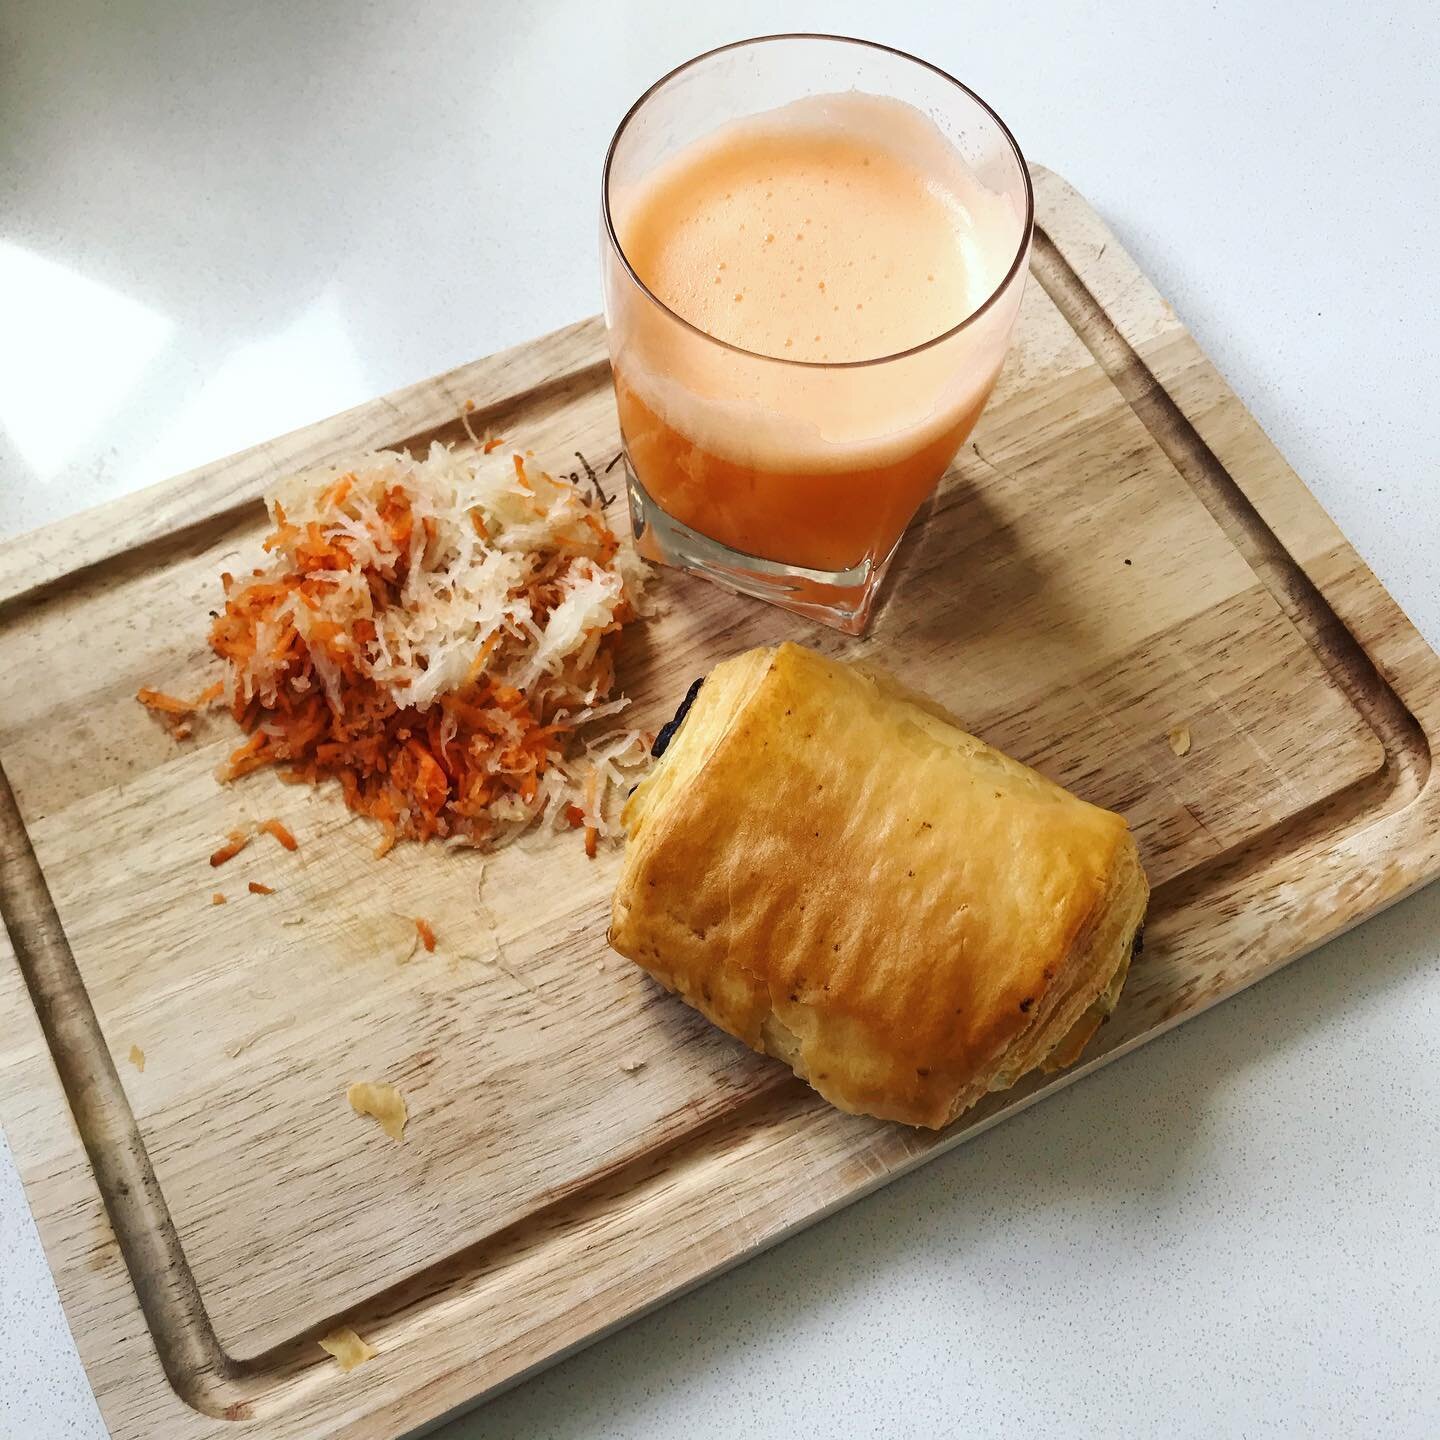 Apple, celeriac and carrot juice. Pastry optional but recommended... Boost a regular glass of apple juice and whizz it up with a handful of raw grated celeriac and carrot. 

#celeriac #celeriacjuice #theuglyone #eatmoreveg #juice #jackbuckfarms #ukgr